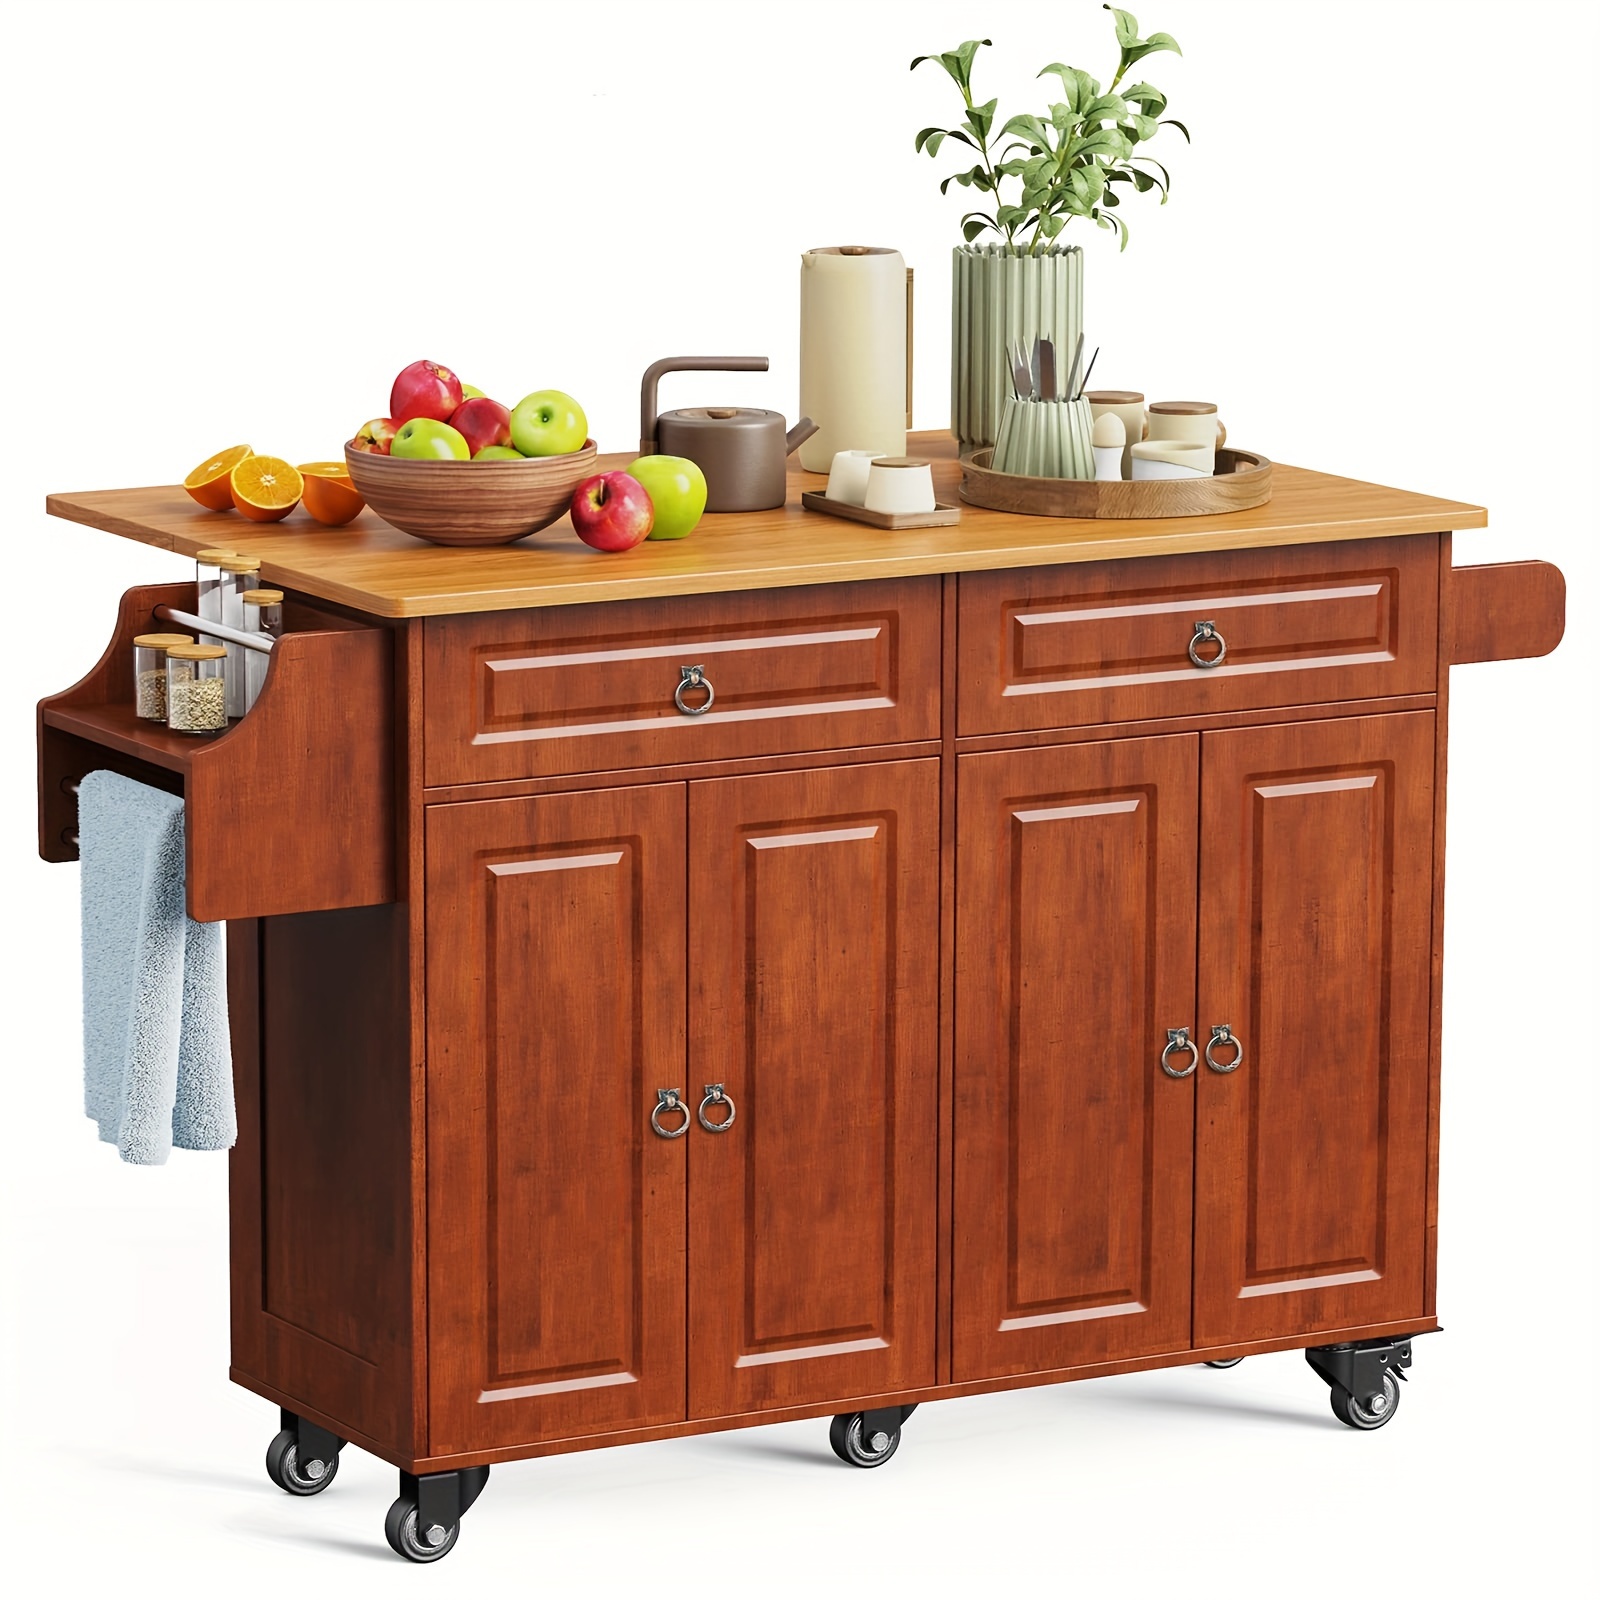 

Rolling Kitchen Island With Drop Leaf, Mobile Kitchen Carts On Wheels Island With Storage Cabinet, Island Table For Kitchen With Wooden Top And Rack And Drawer, Retro For Portable Bars